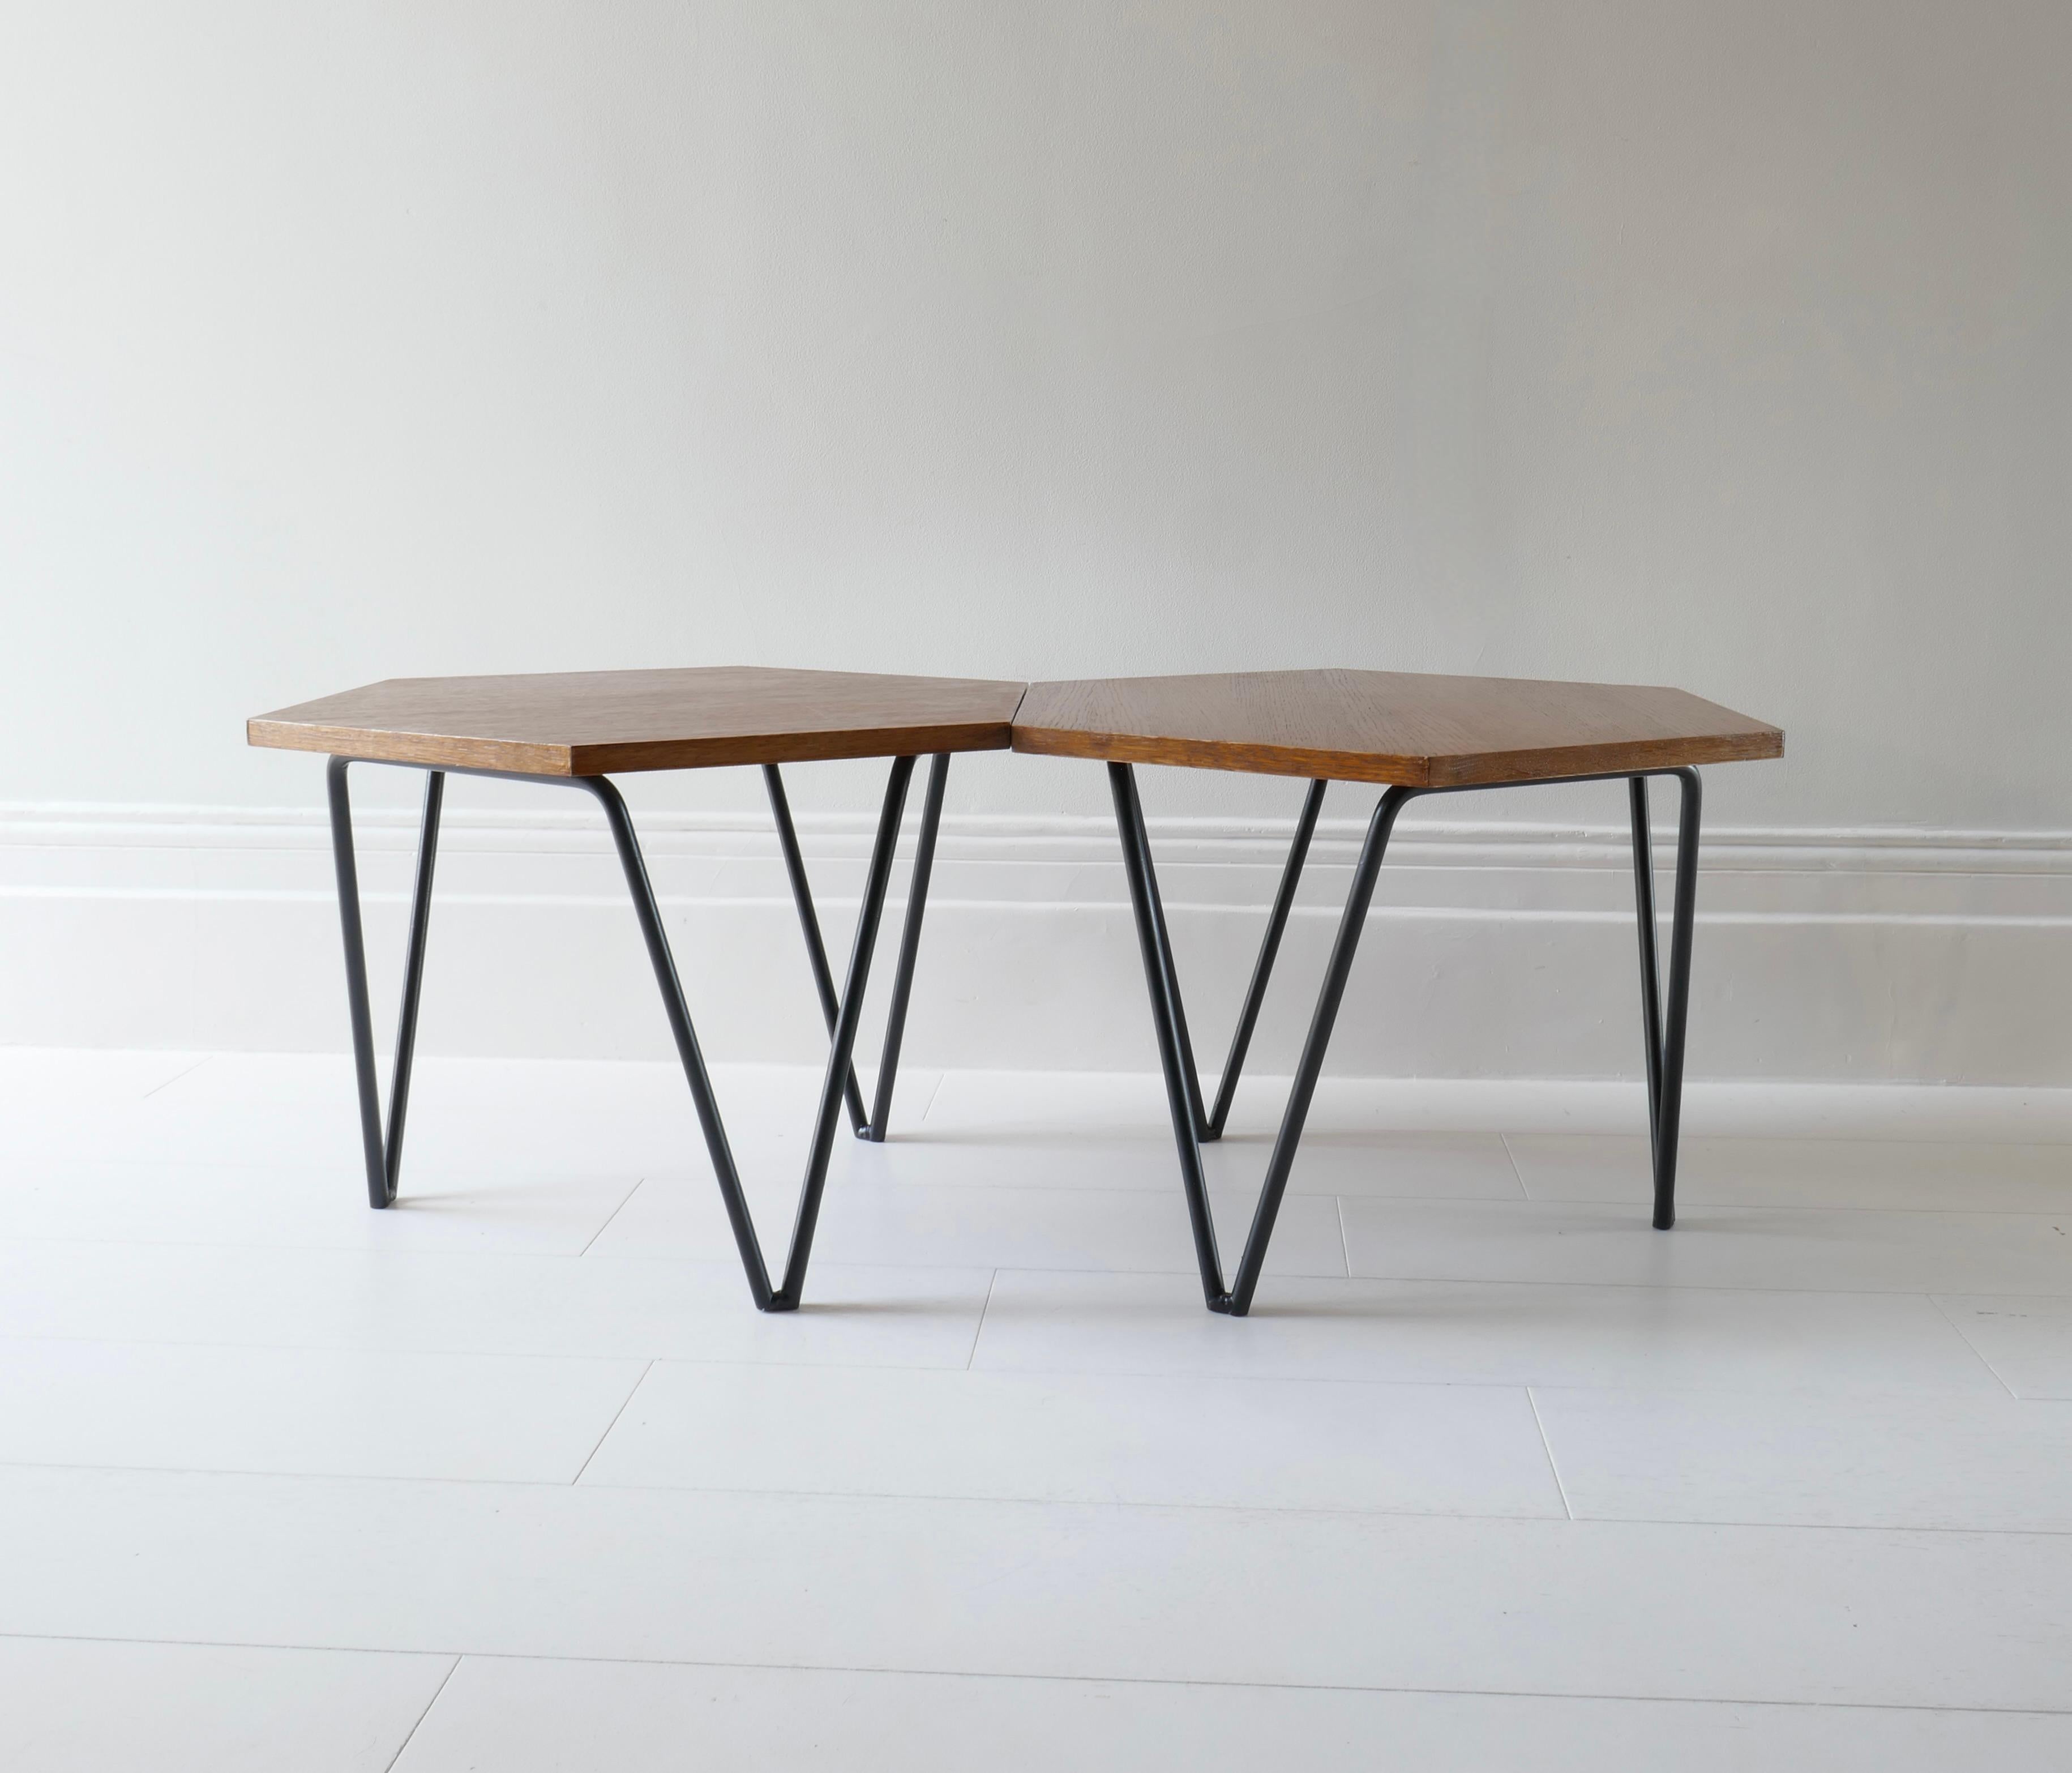 Wrought Iron Set of 2 Hexagonal Gio Ponti Low Tables by Isa Bergamo, Italy, 1950s For Sale